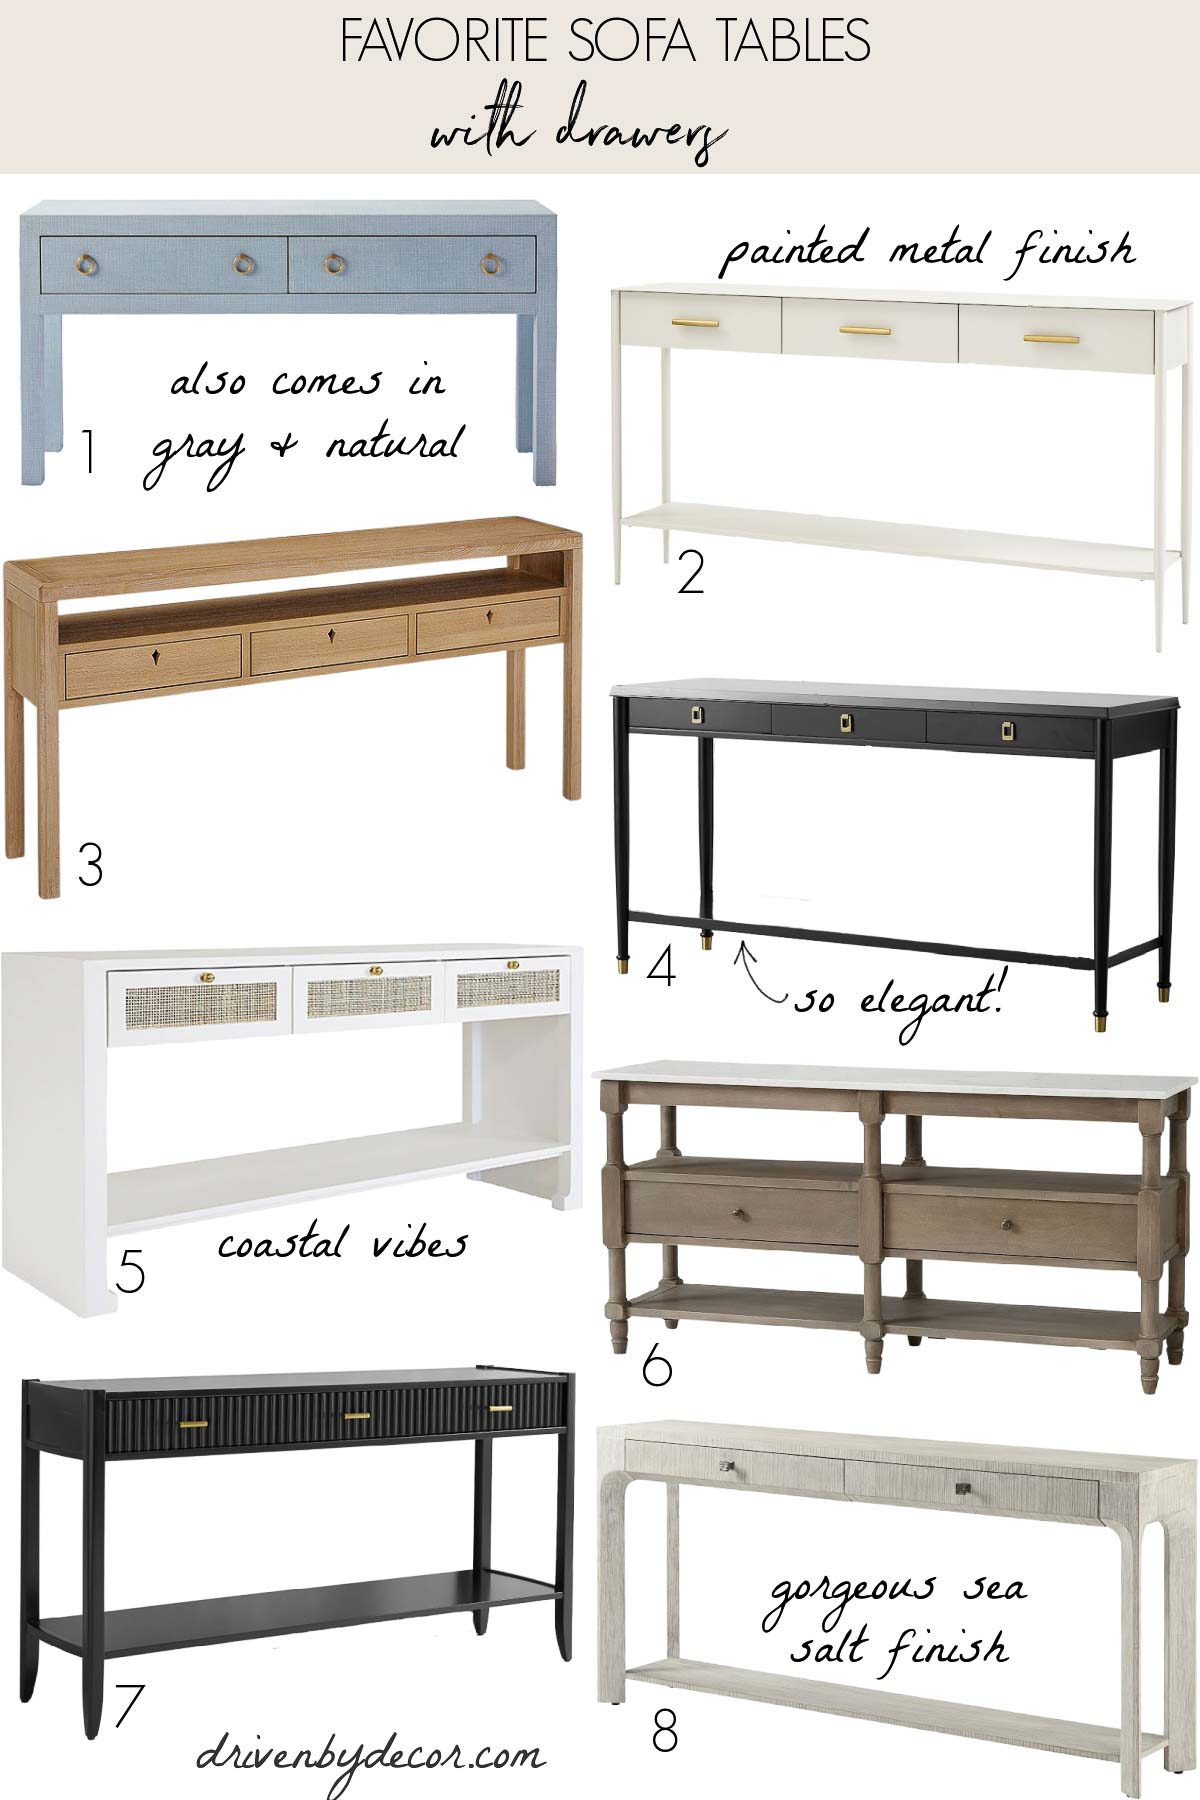 8 sofa tables with drawers